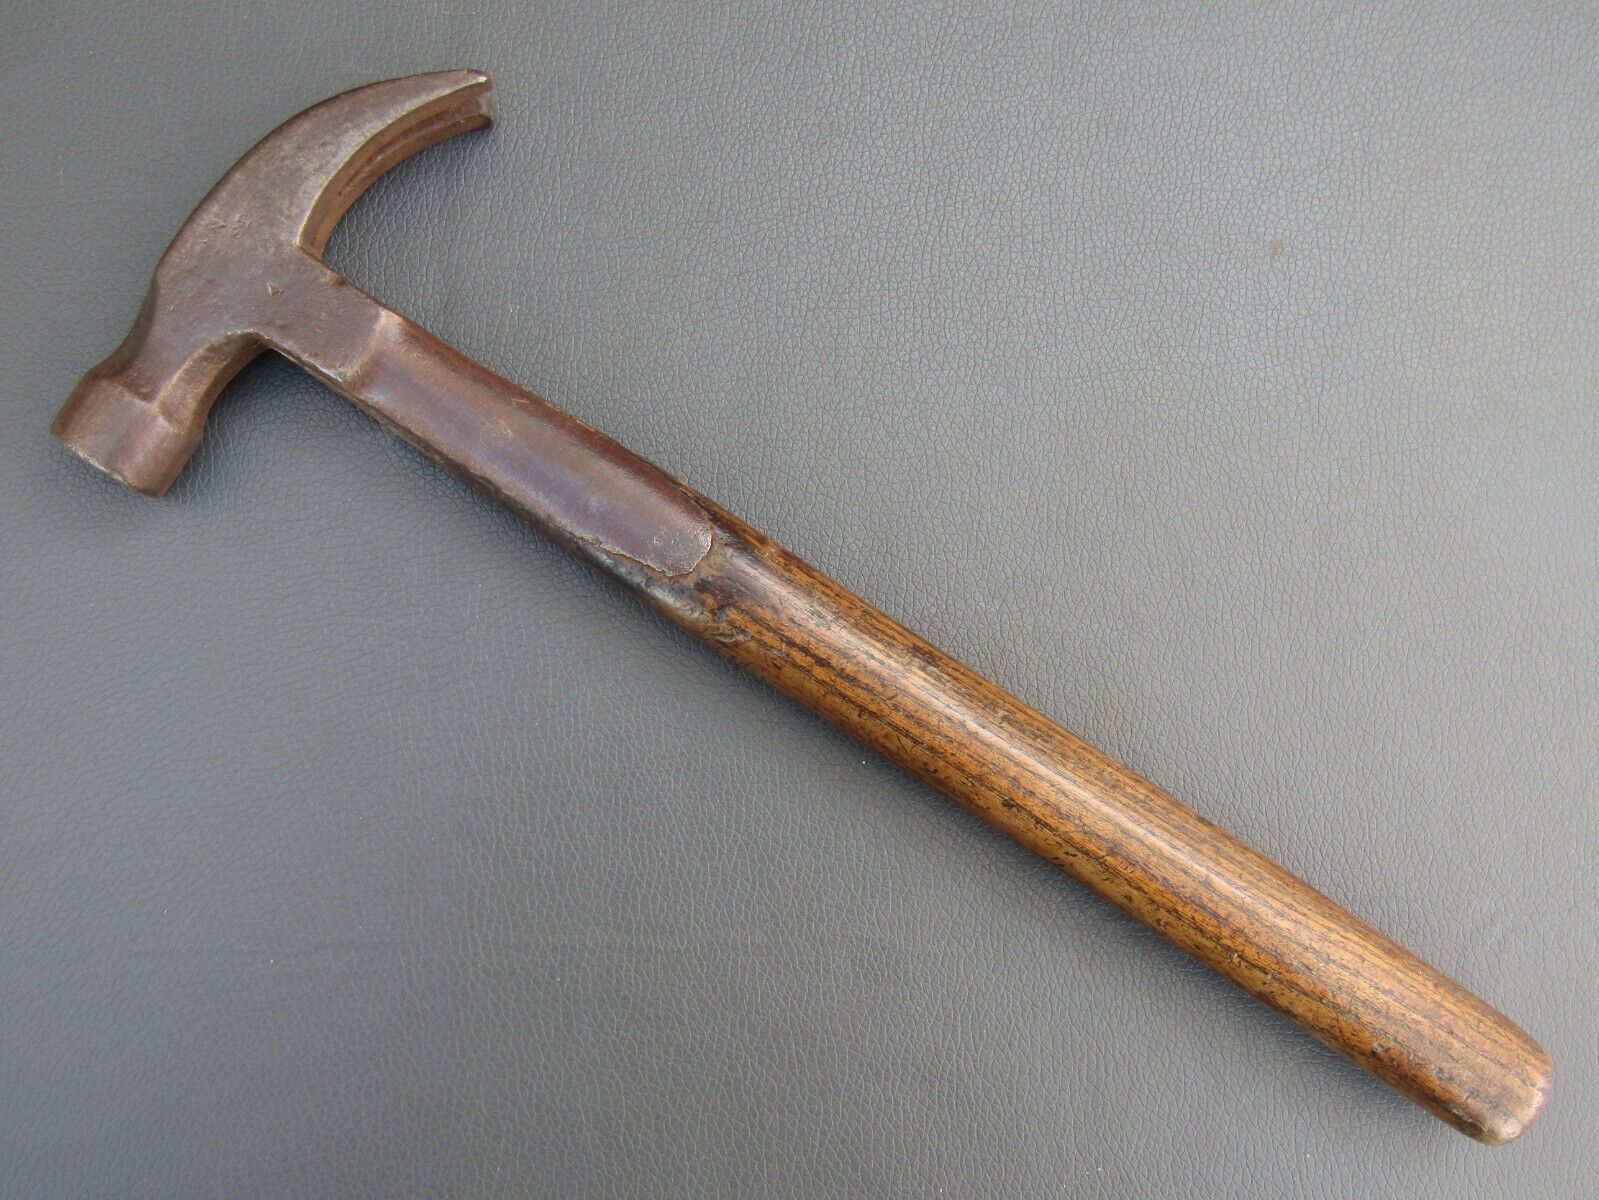 Vintage strapped claw hammer no 4 old tool possibly by Fenn